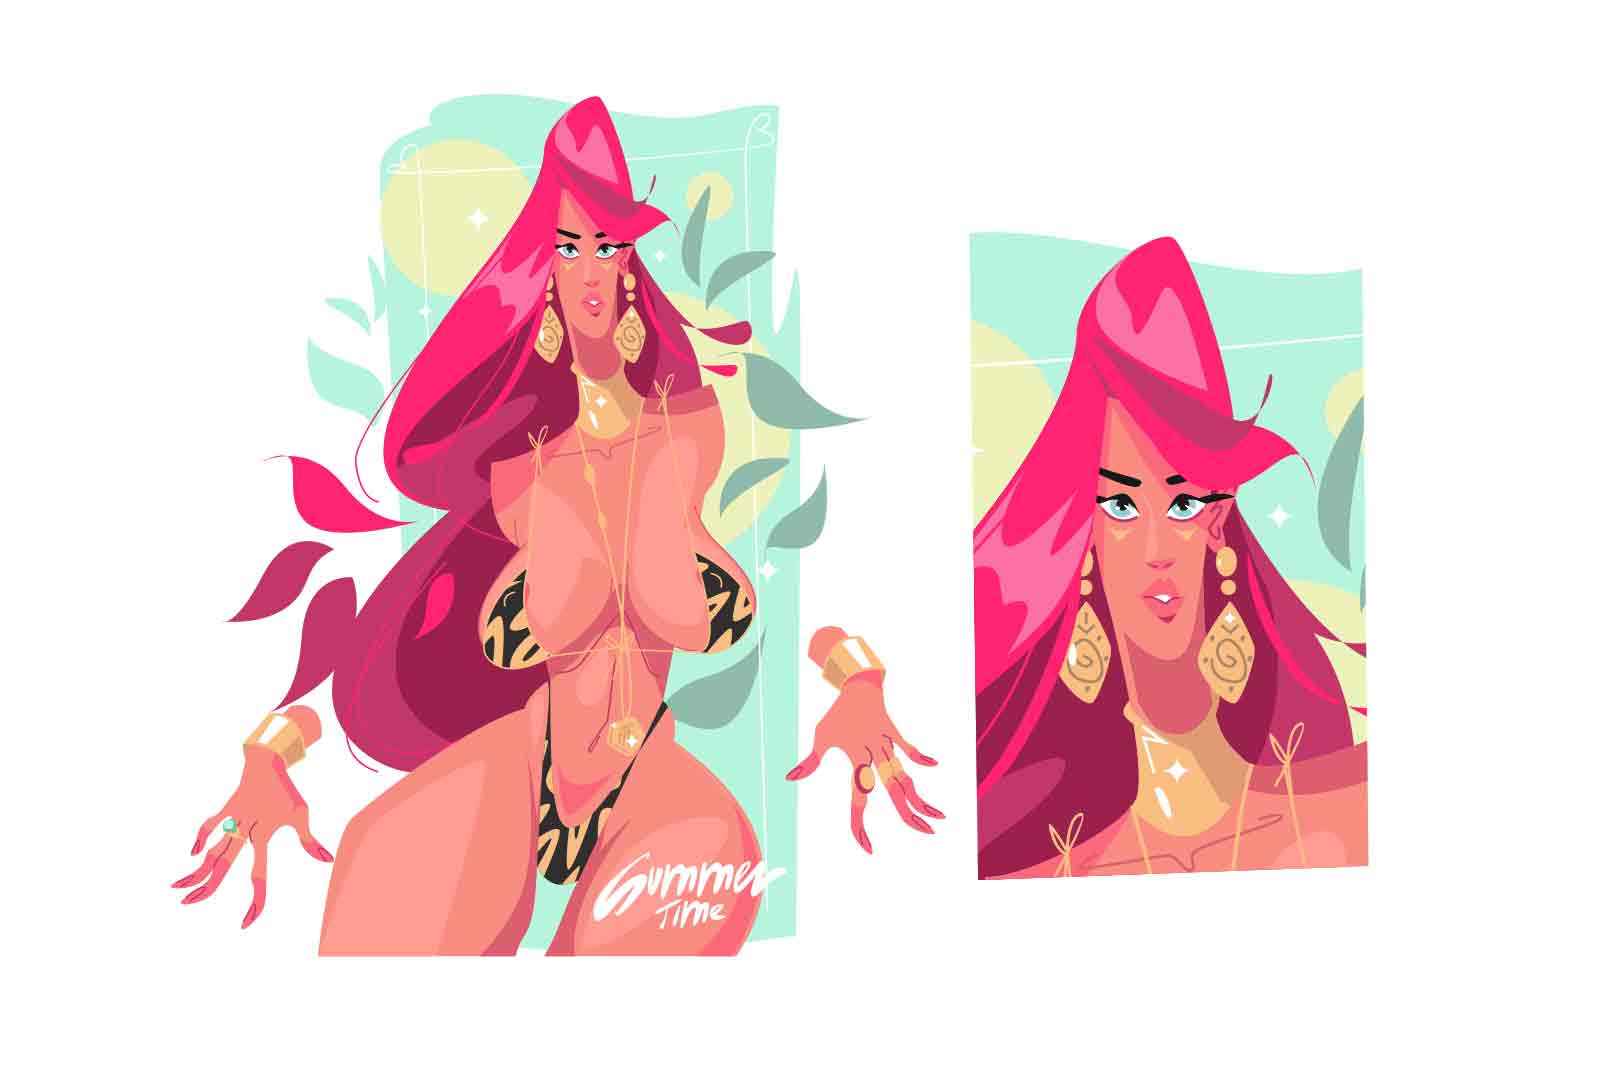 Pink-haired woman in bikini, vector illustration. The image is split into two panels with a light green background and abstract shapes